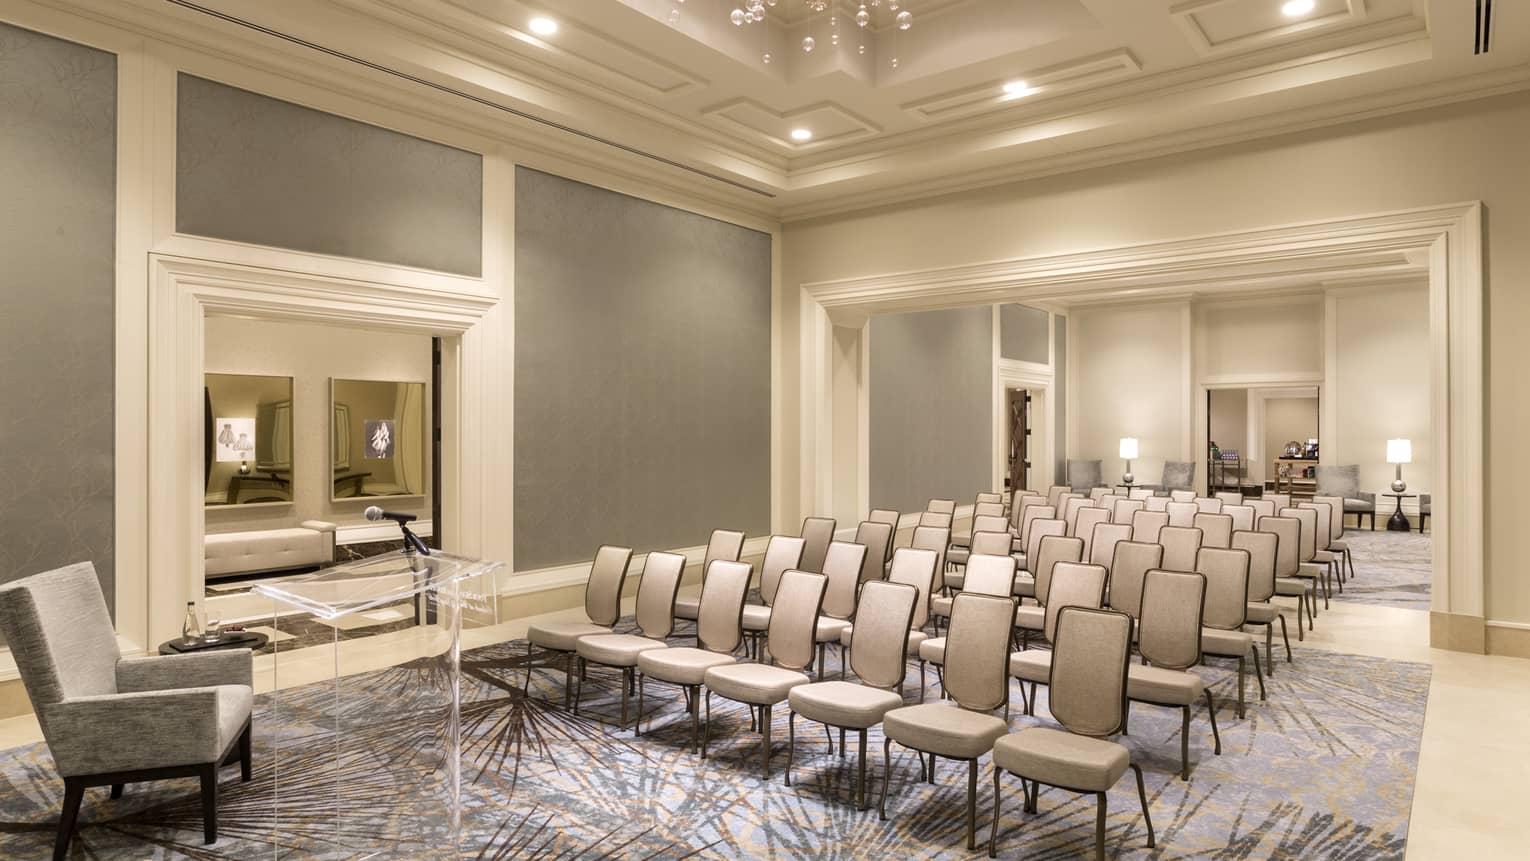 Palm Ballroom Foyer conference with rows of chairs facing plush armchair 